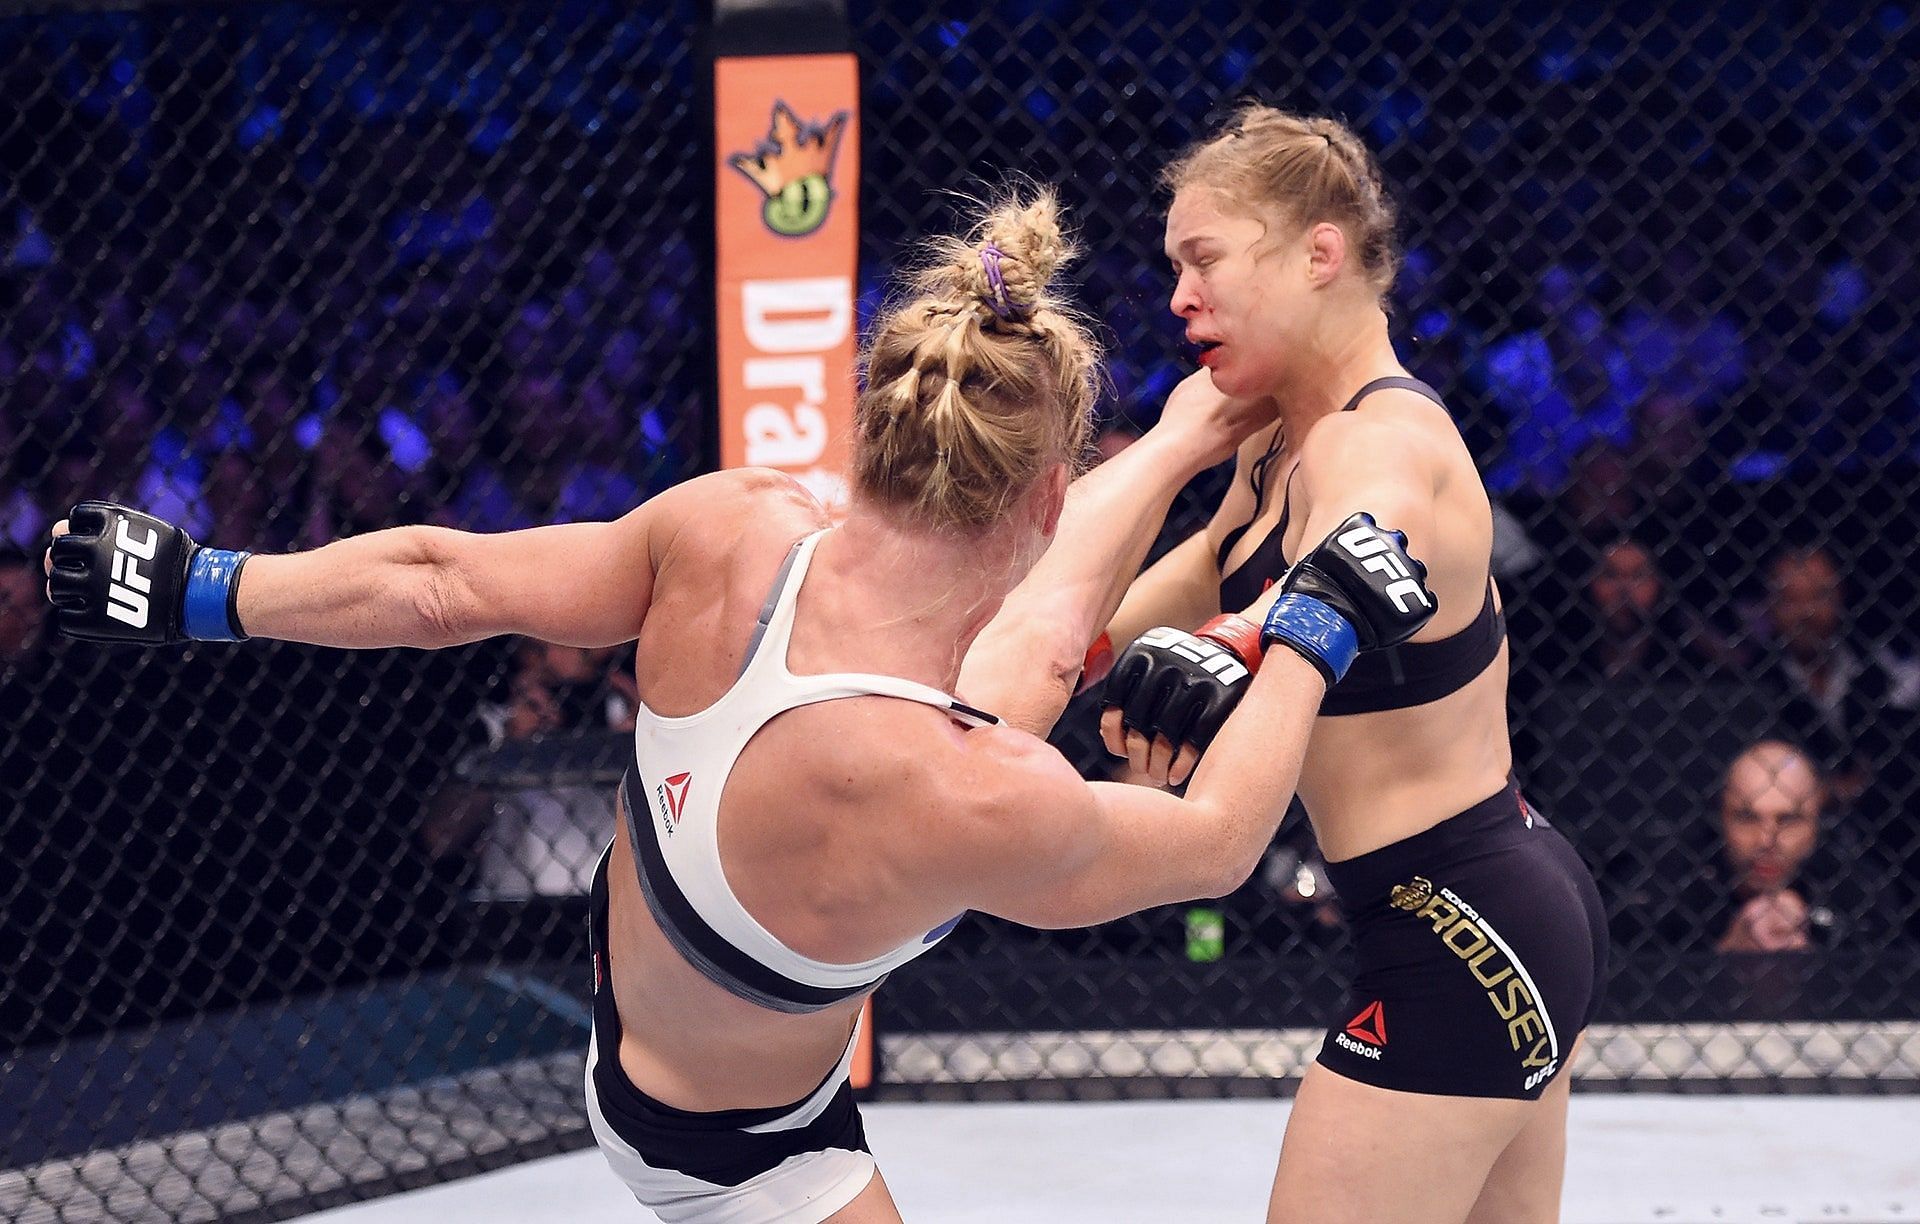 Holly Holm&#039;s knockout of Ronda Rousey remains one of the UFC&#039;s greatest upsets